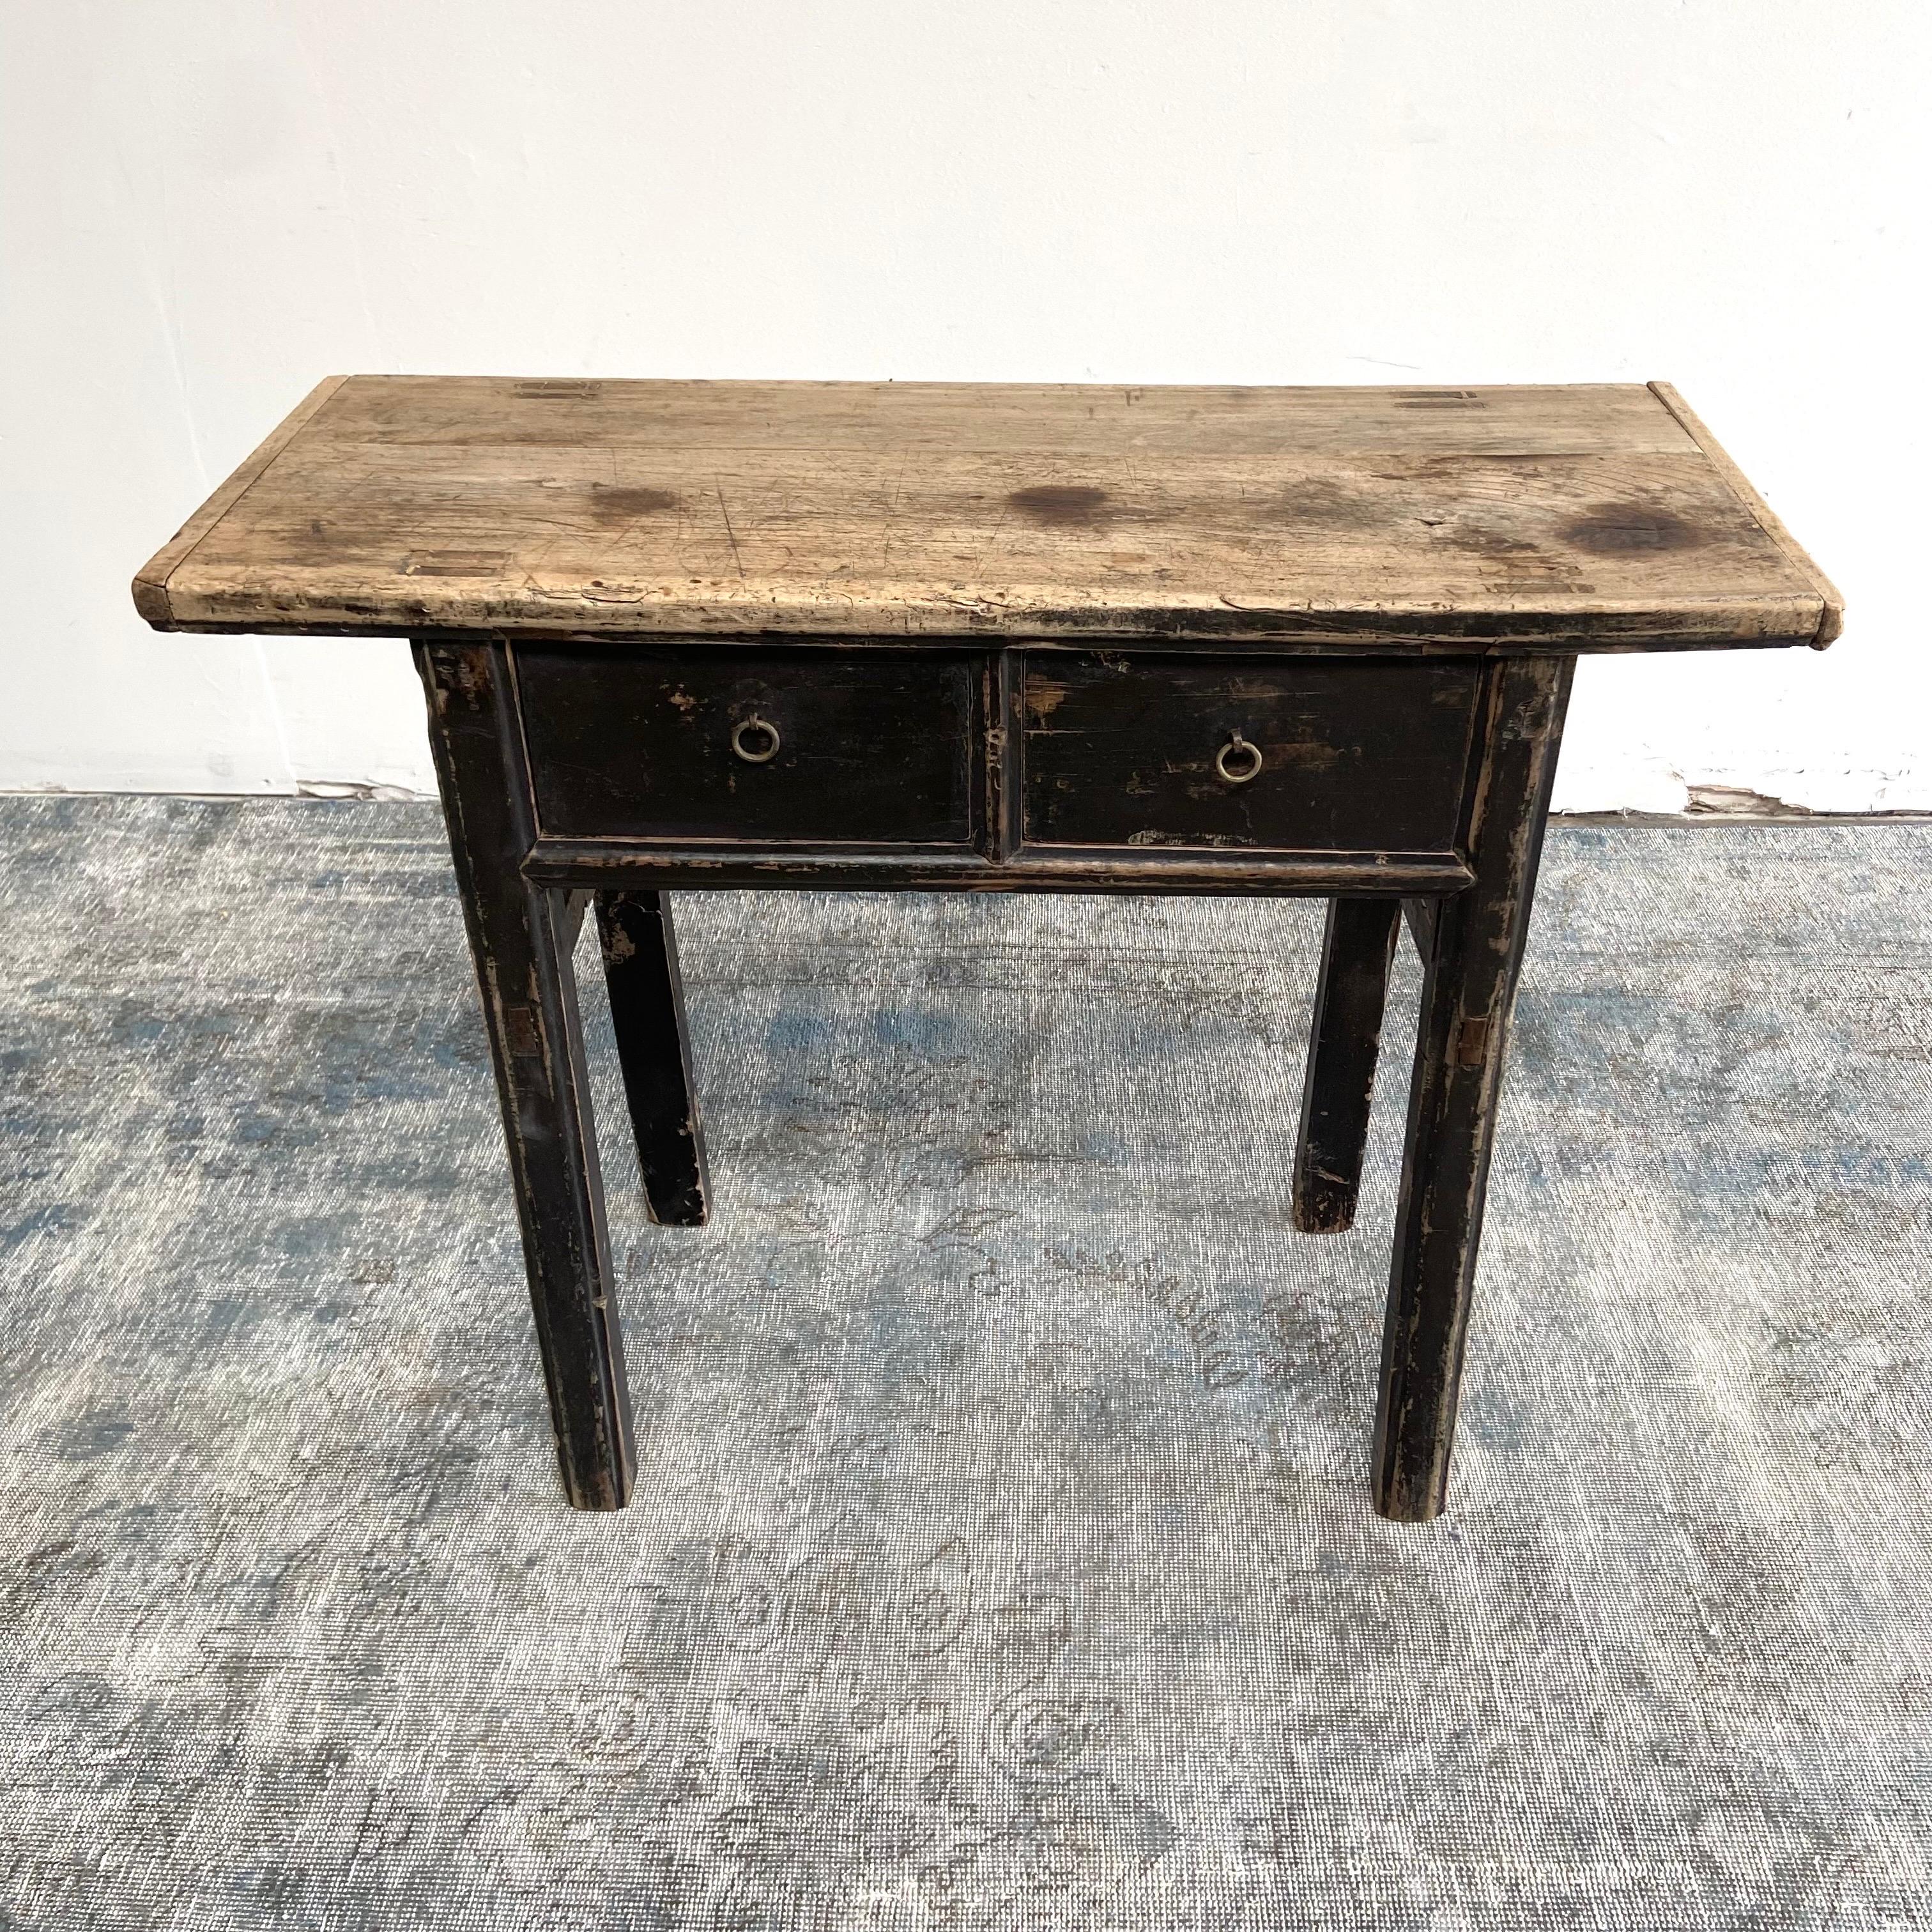 Vintage Antique Elm wood console table Made from Vintage reclaimed elm wood. Beautiful antique patina, with weathering and age, these are solid and sturdy ready for daily use, use as a entry table, sofa table or console in a dining room. Great in a